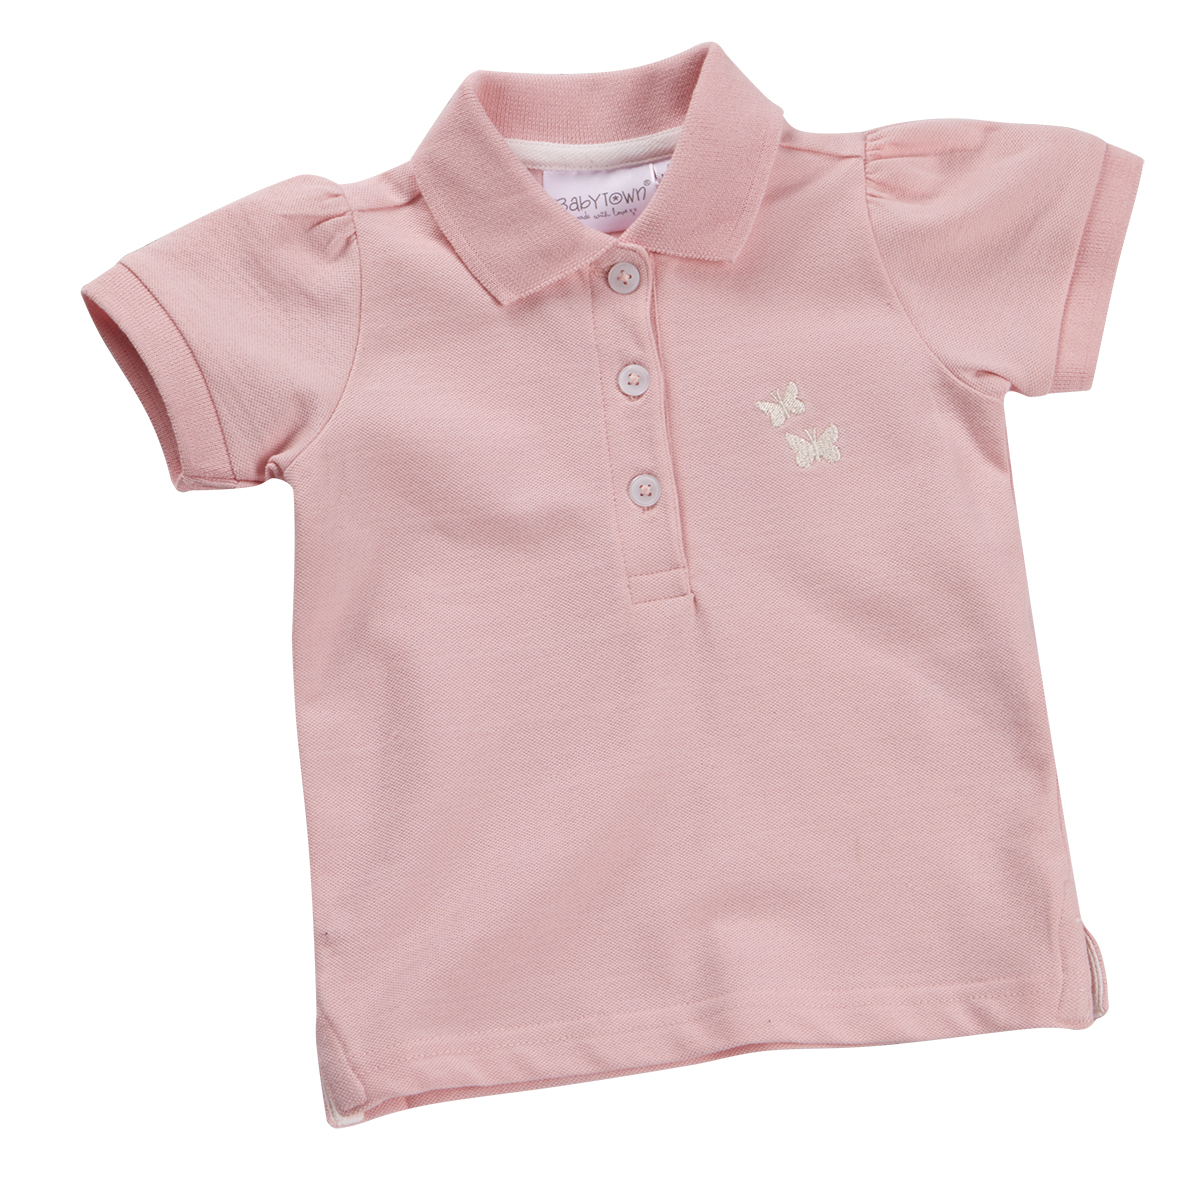 polo t shirt for girls